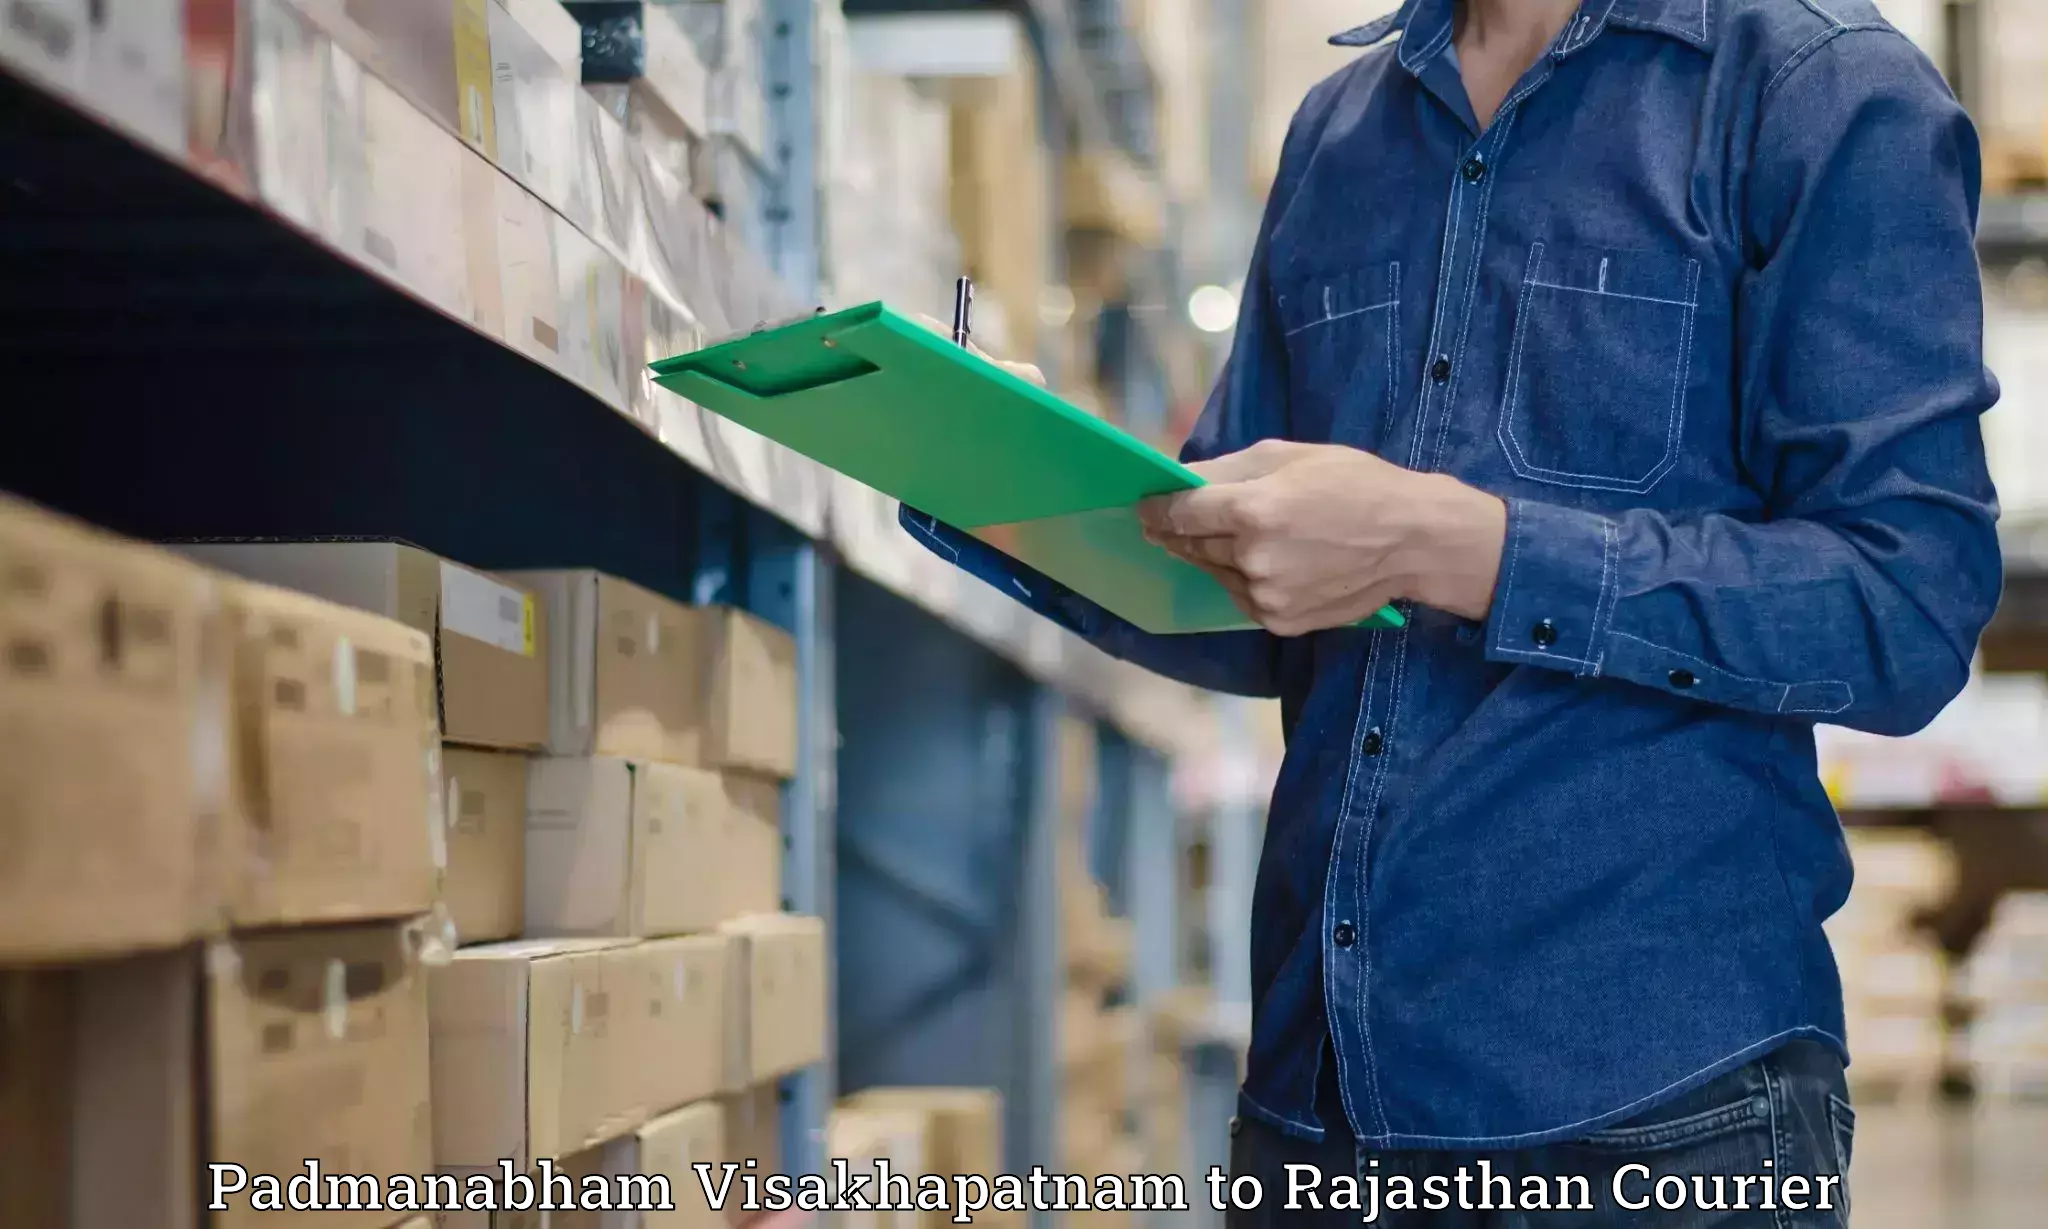 Courier service innovation Padmanabham Visakhapatnam to Piparcity